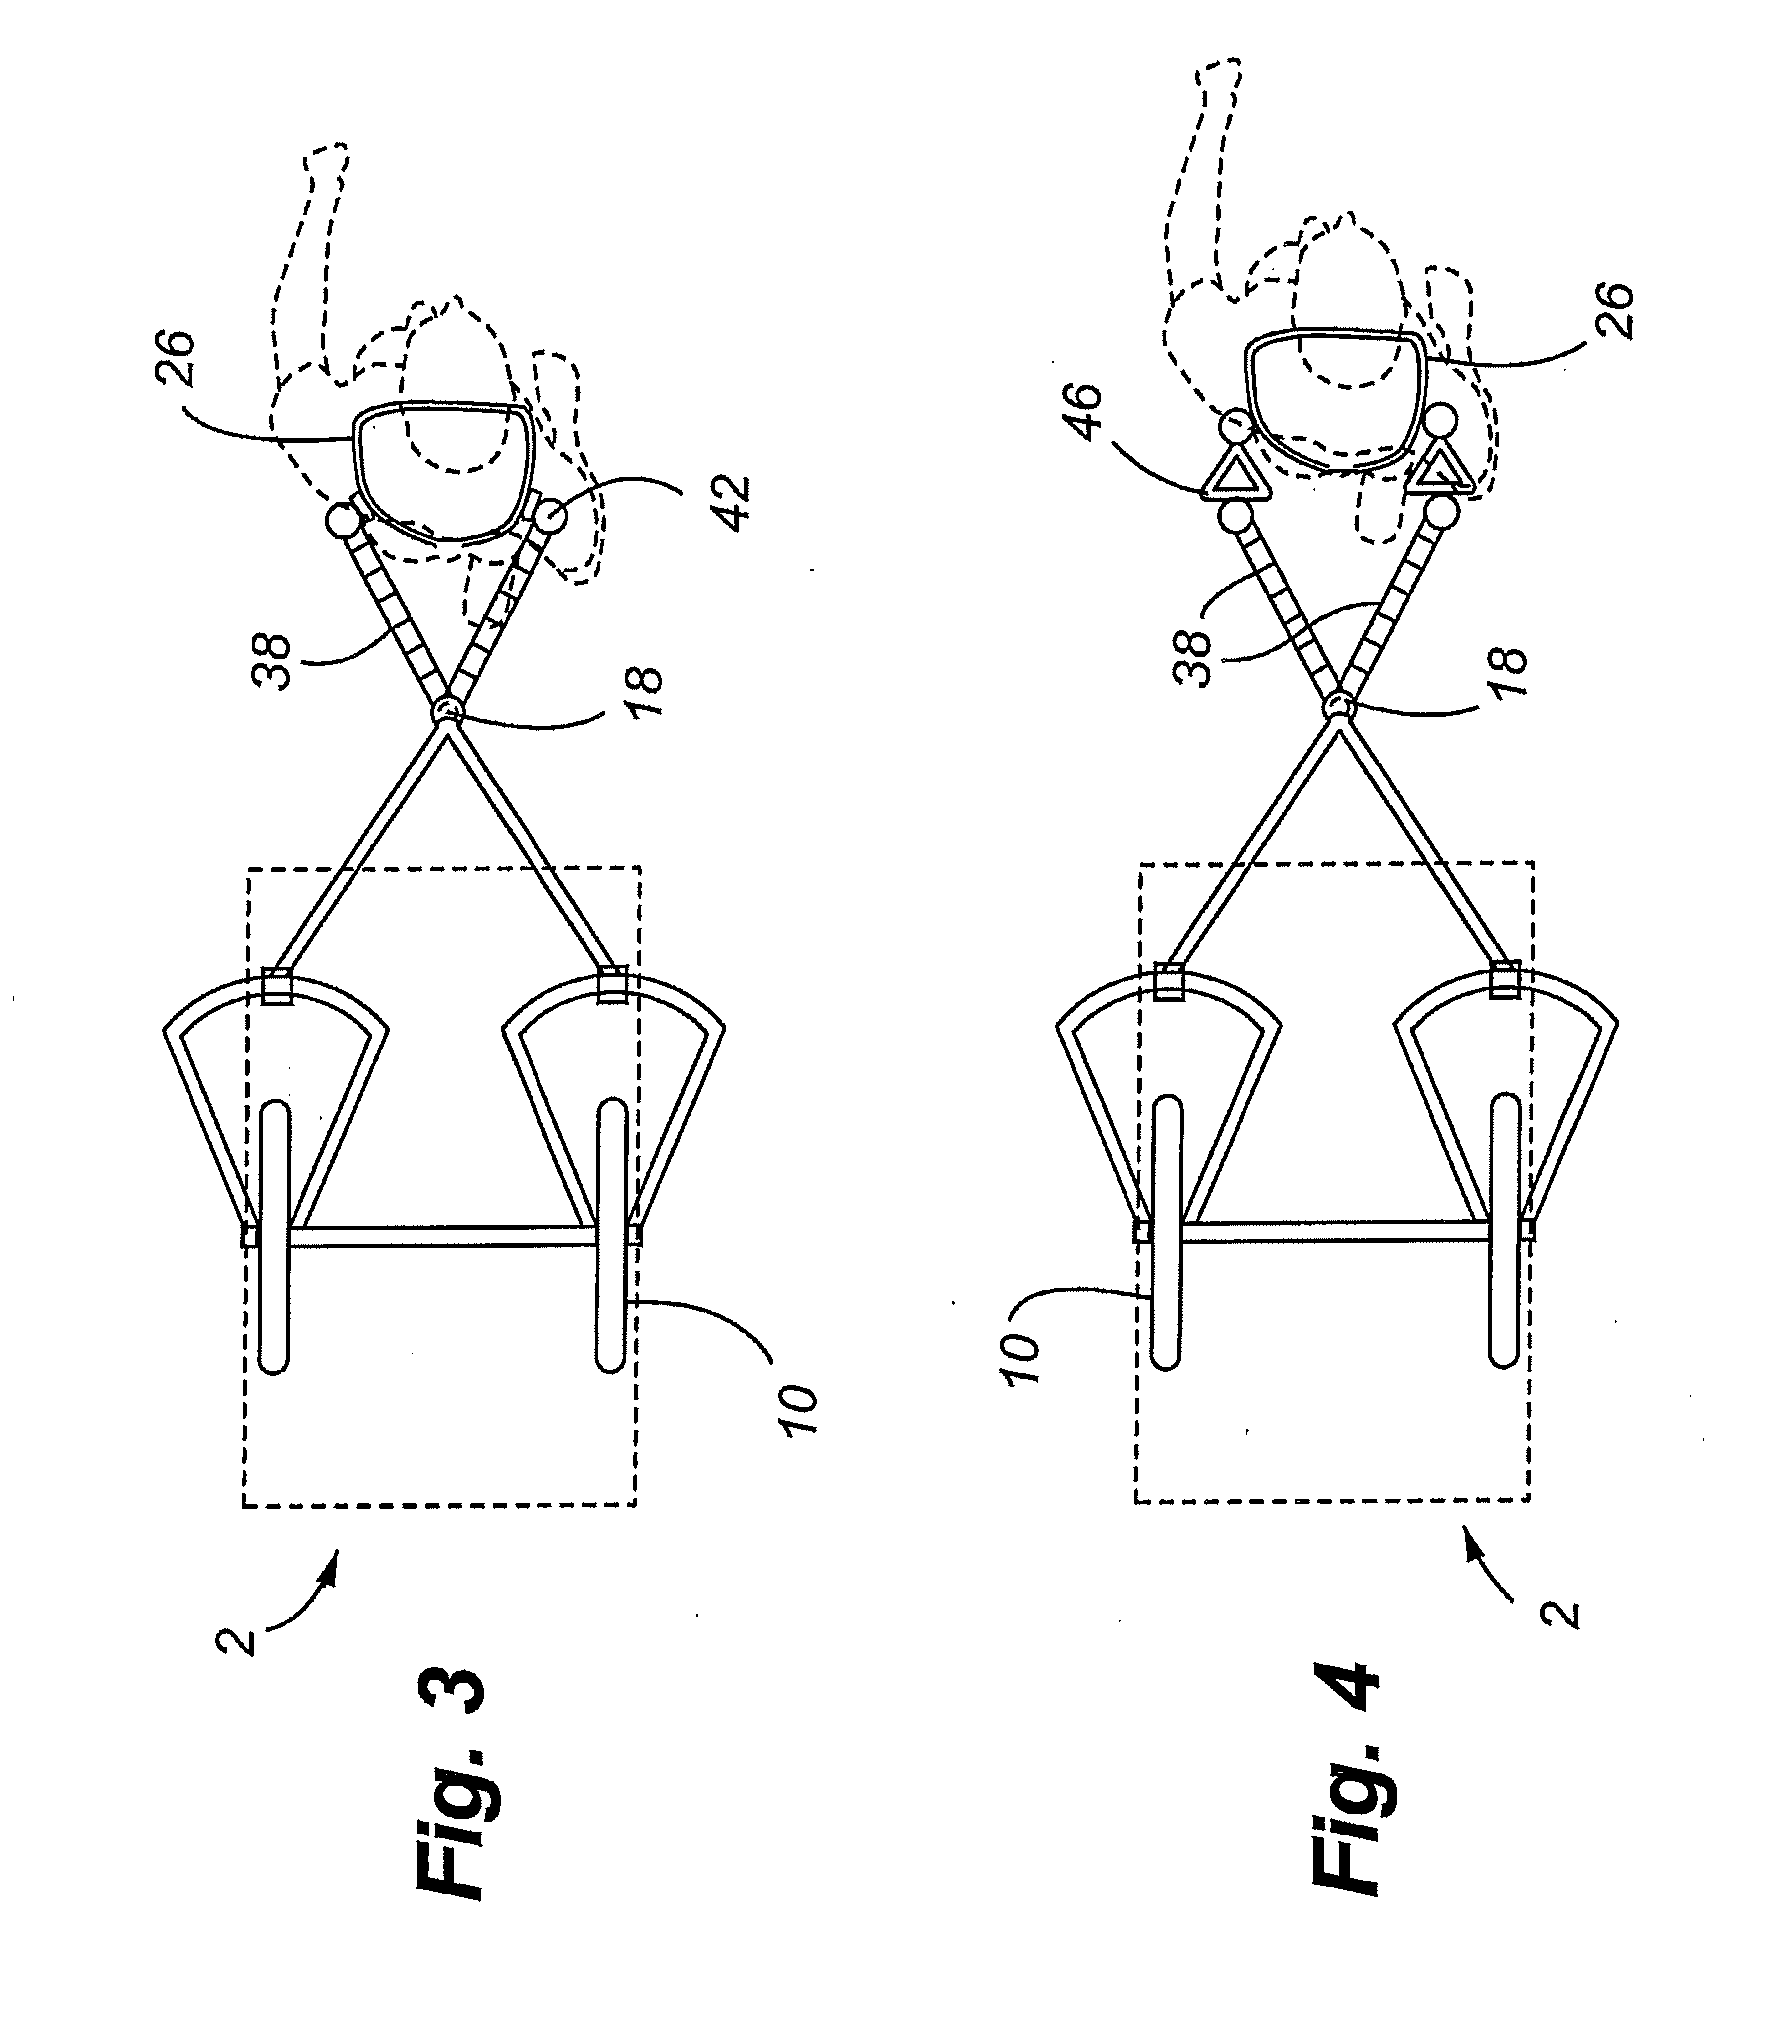 Carriage and incorporated harness with damping mechanisms for improved towing and stability of the carriage